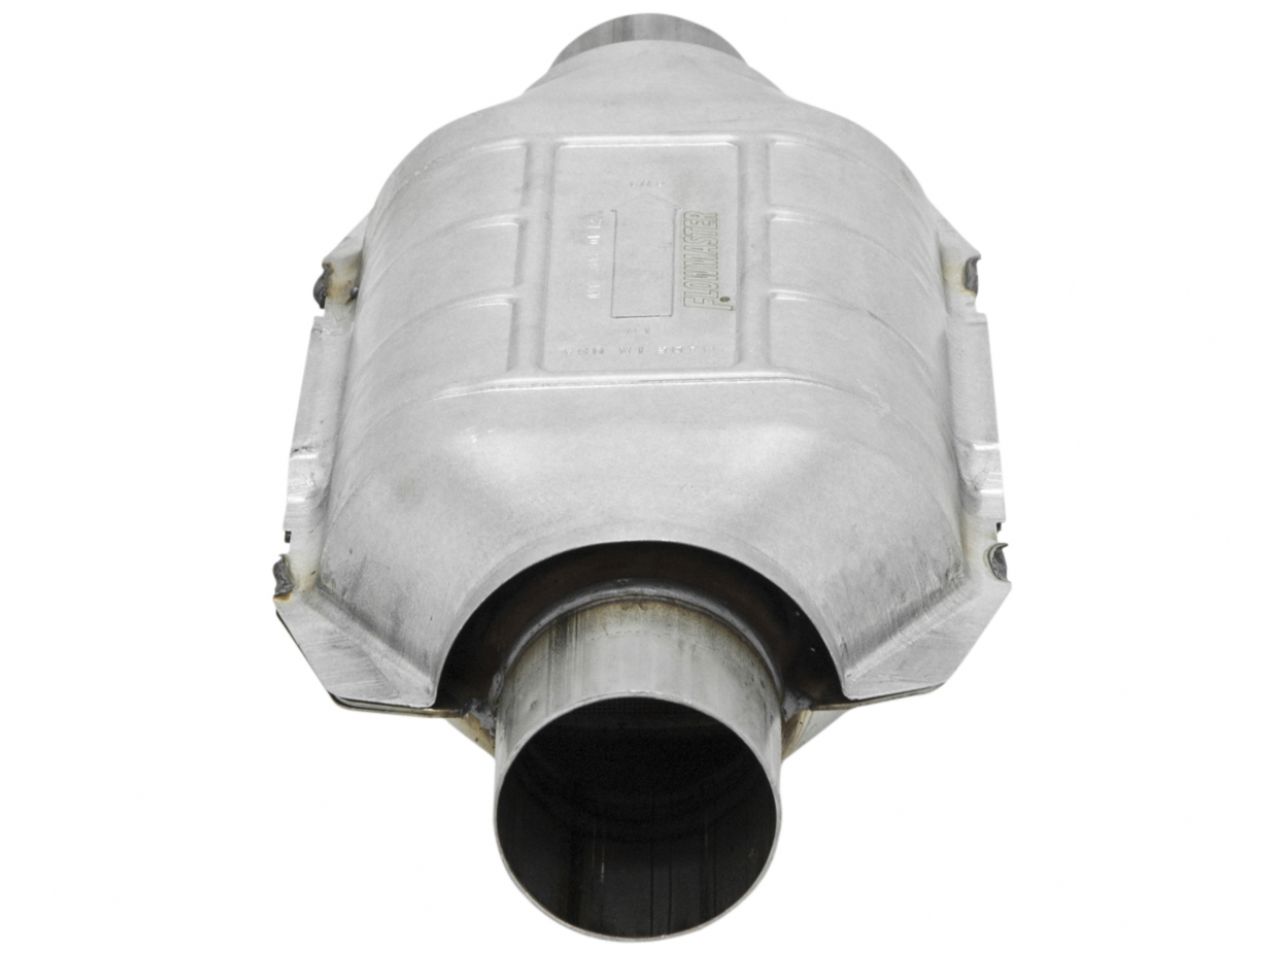 Flowmaster Catalytic Converter, Universal-Fit, 240 Series, Heavy Duty, 3.00" IN /